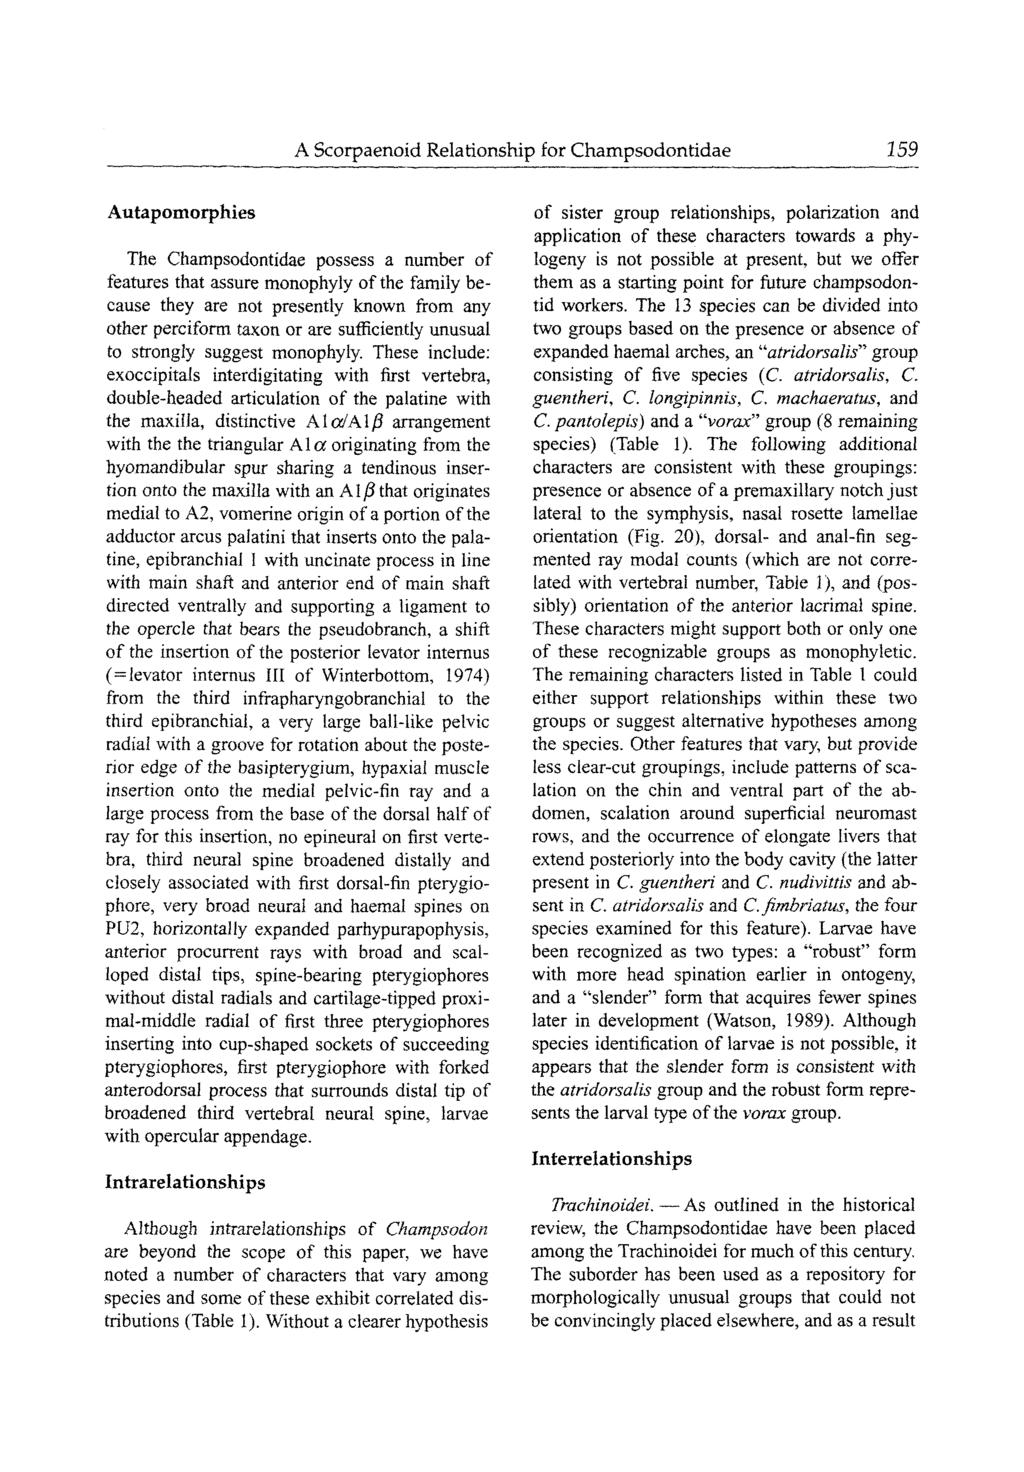 A Scorpaenoid Relationship for Champsodontidae 159 Autapomorphies The Champsodontidae possess a number of features that assure monophyly of the family because they are not presently known from any